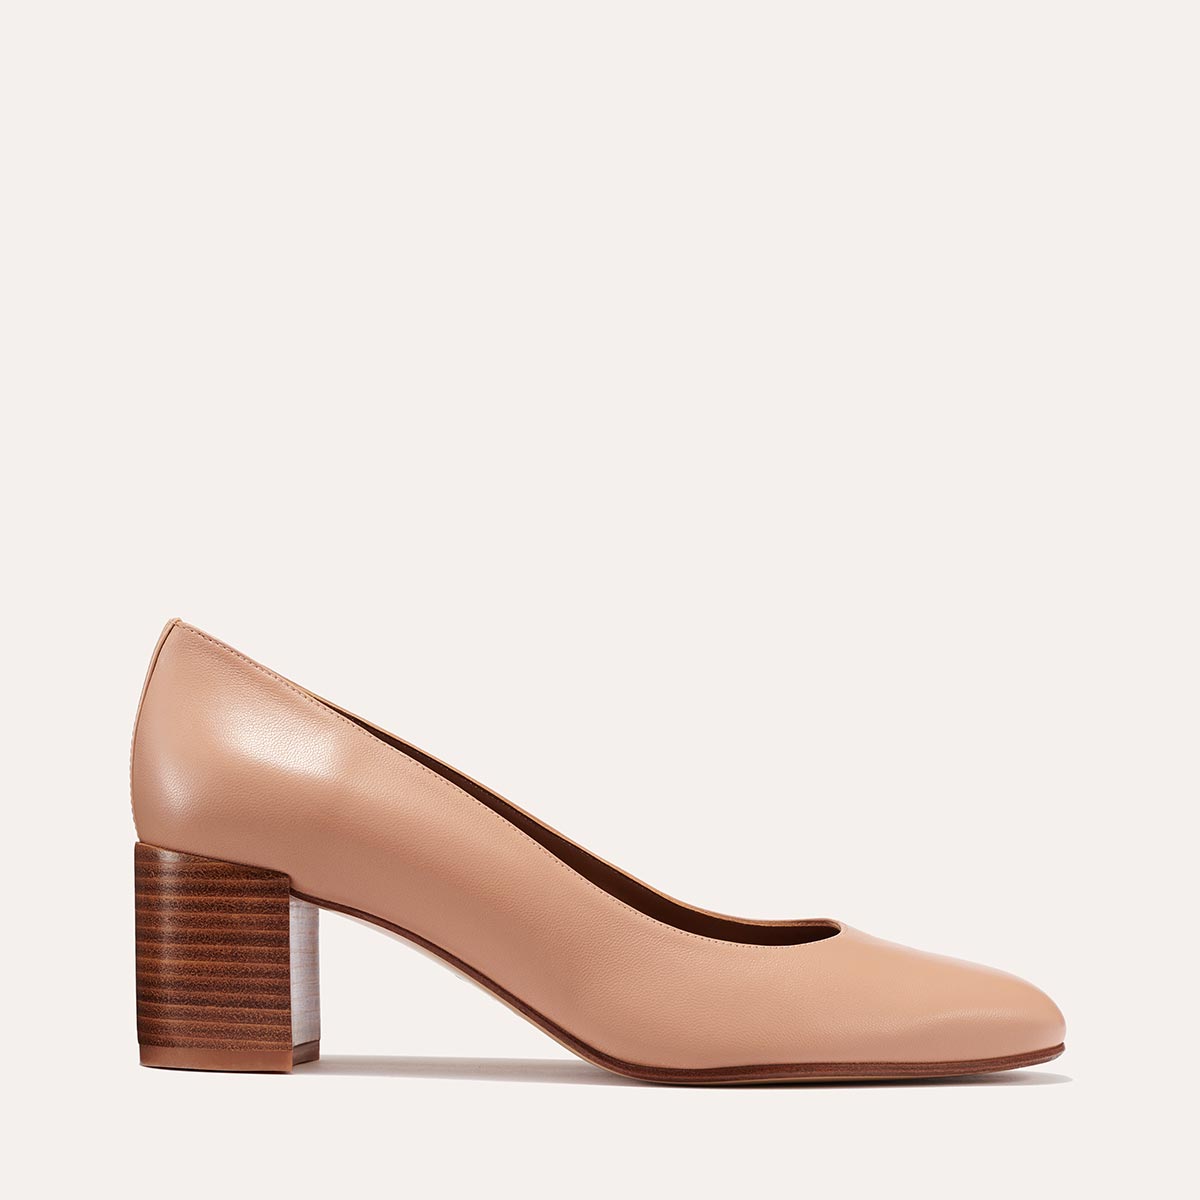 Margaux's classic and comfortable workwear Heel, made in Spain from soft, nude pink Italian nappa leather